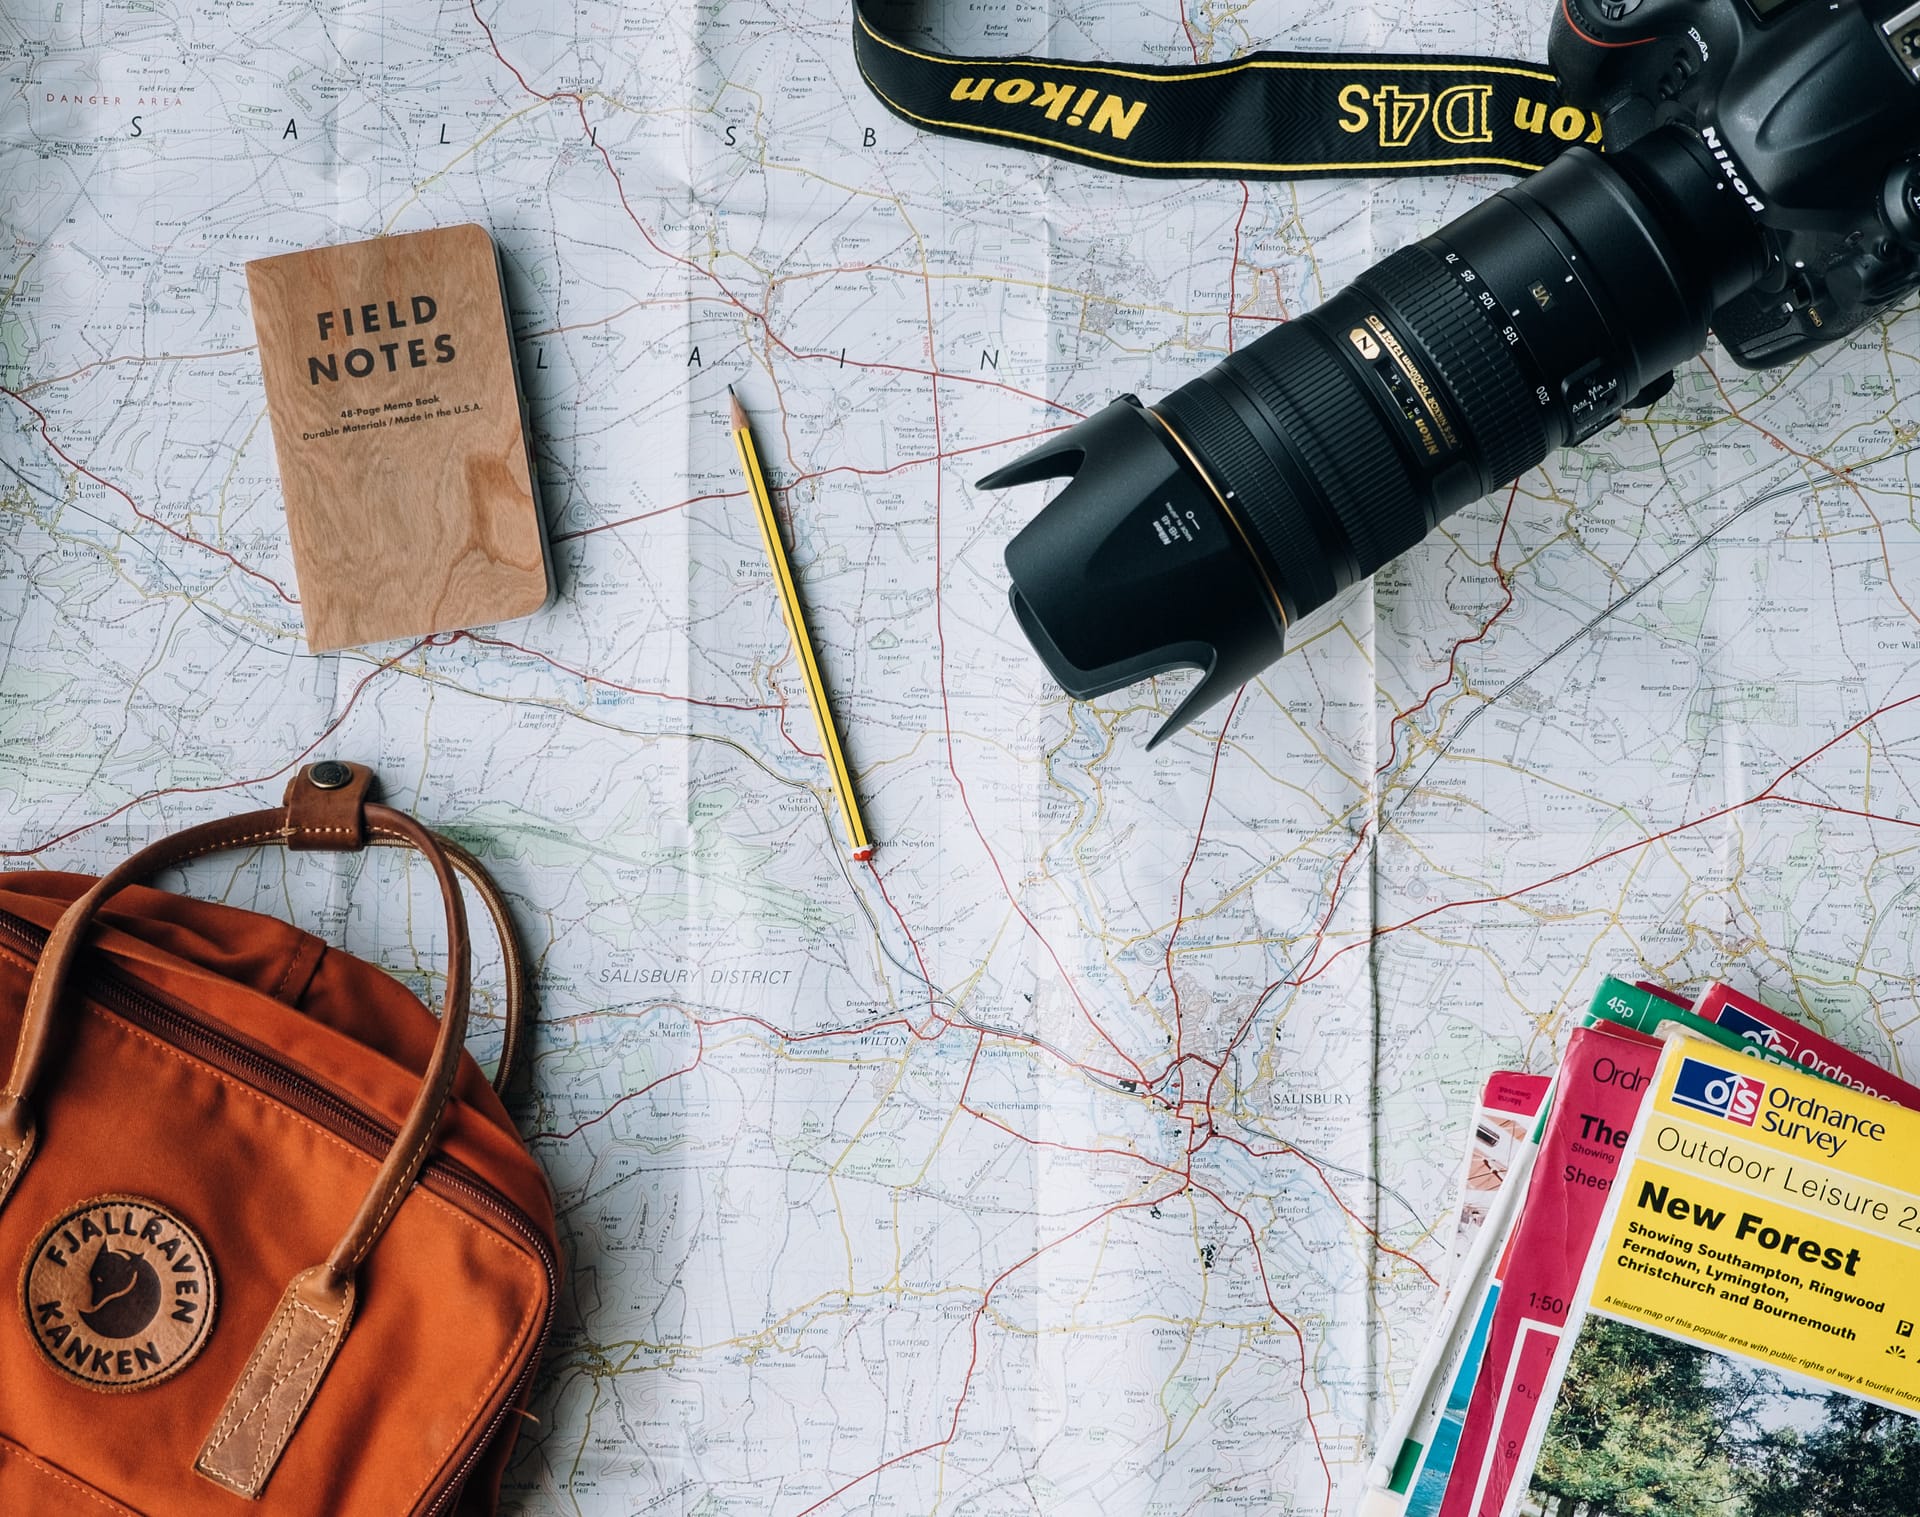 Picture of a map with hiking must haves, like trail maps, a backpack, a camera + field notes notebook